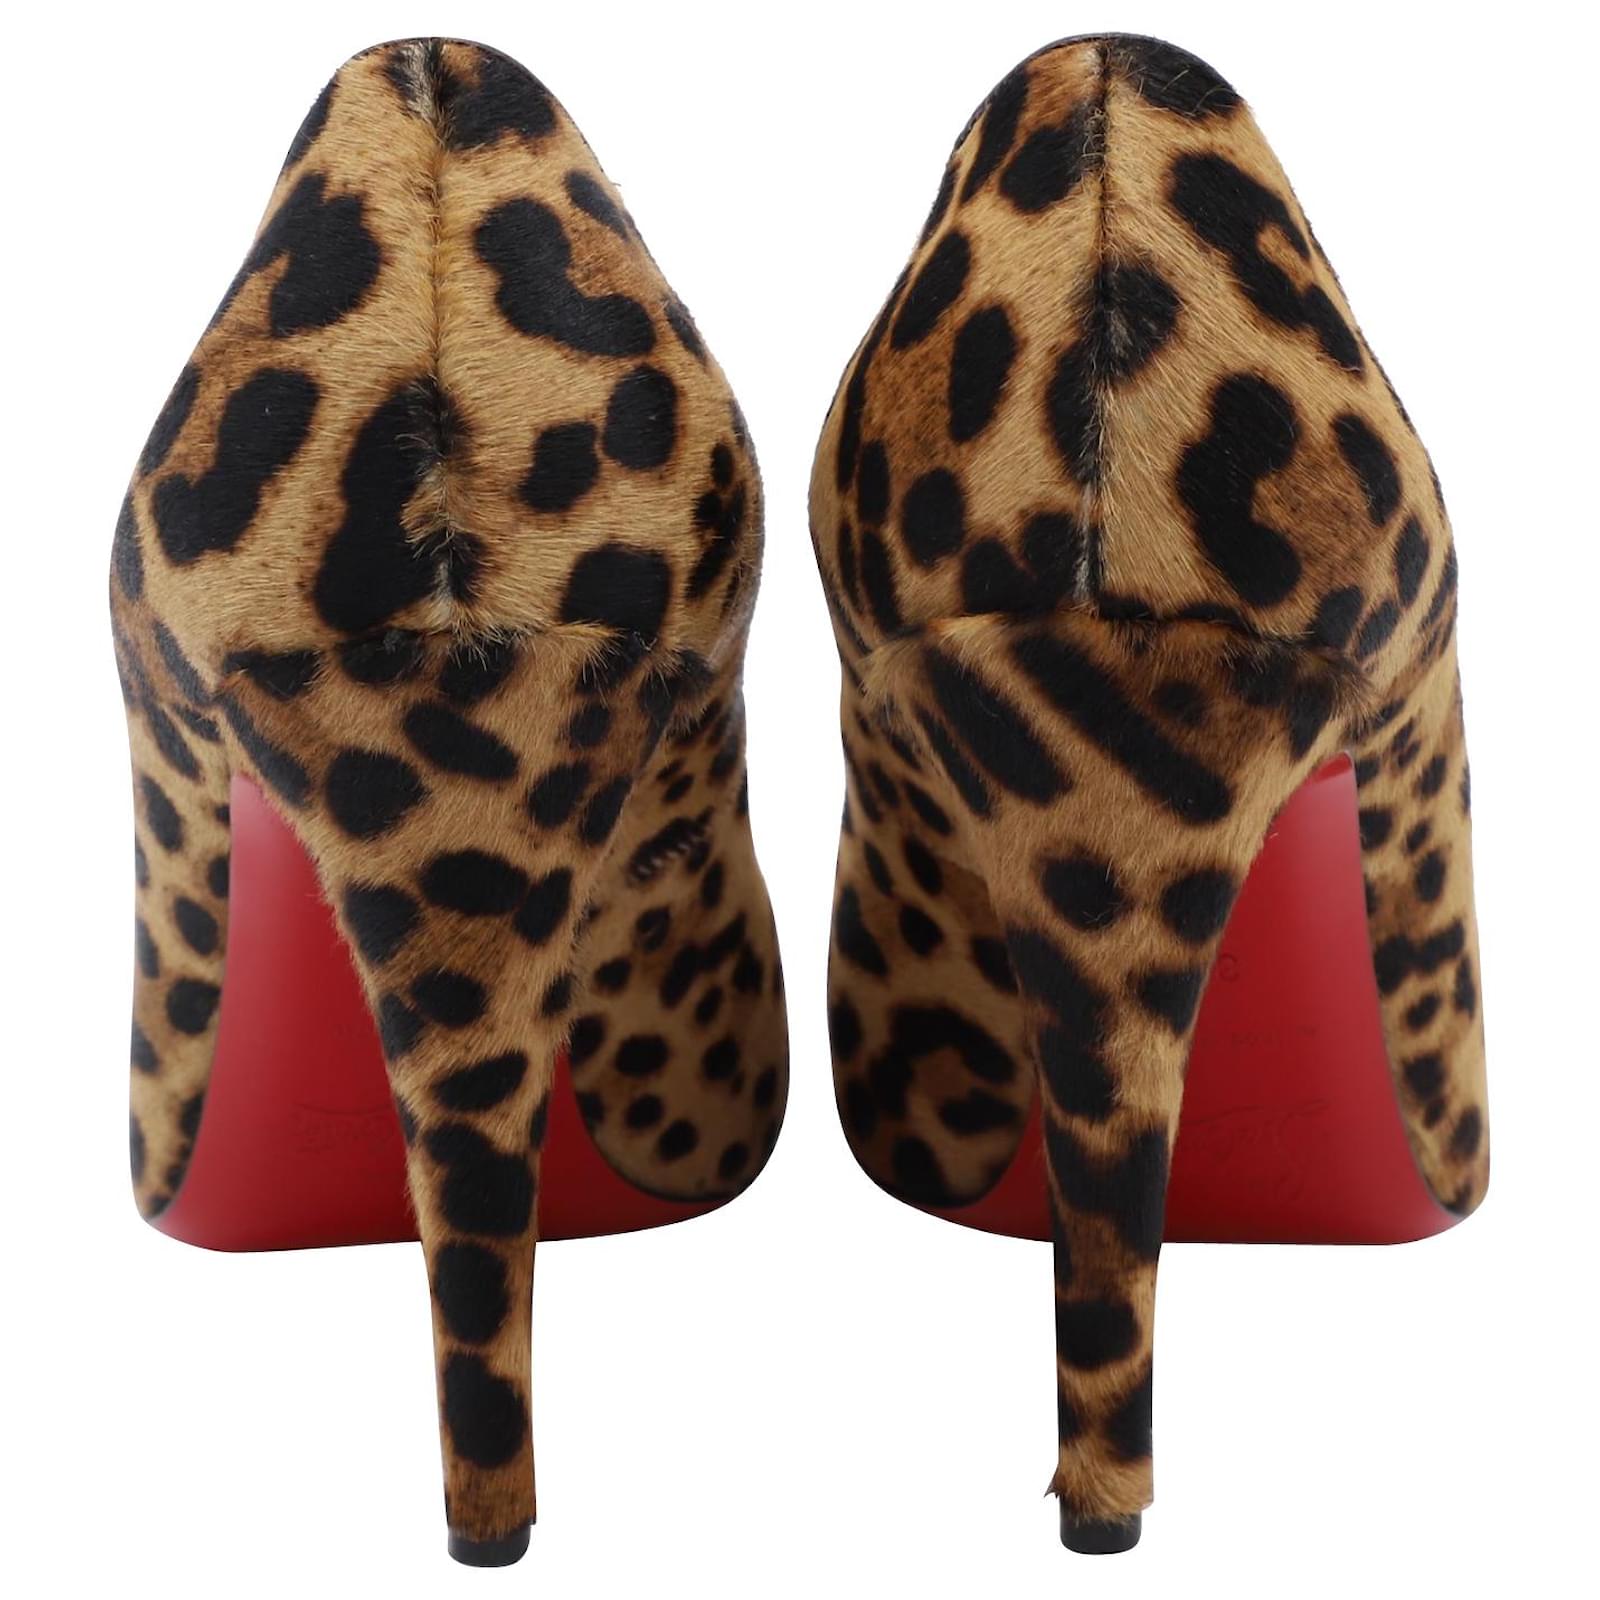 Christian Louboutin Multicolor Leather Fabric and Pony Hair